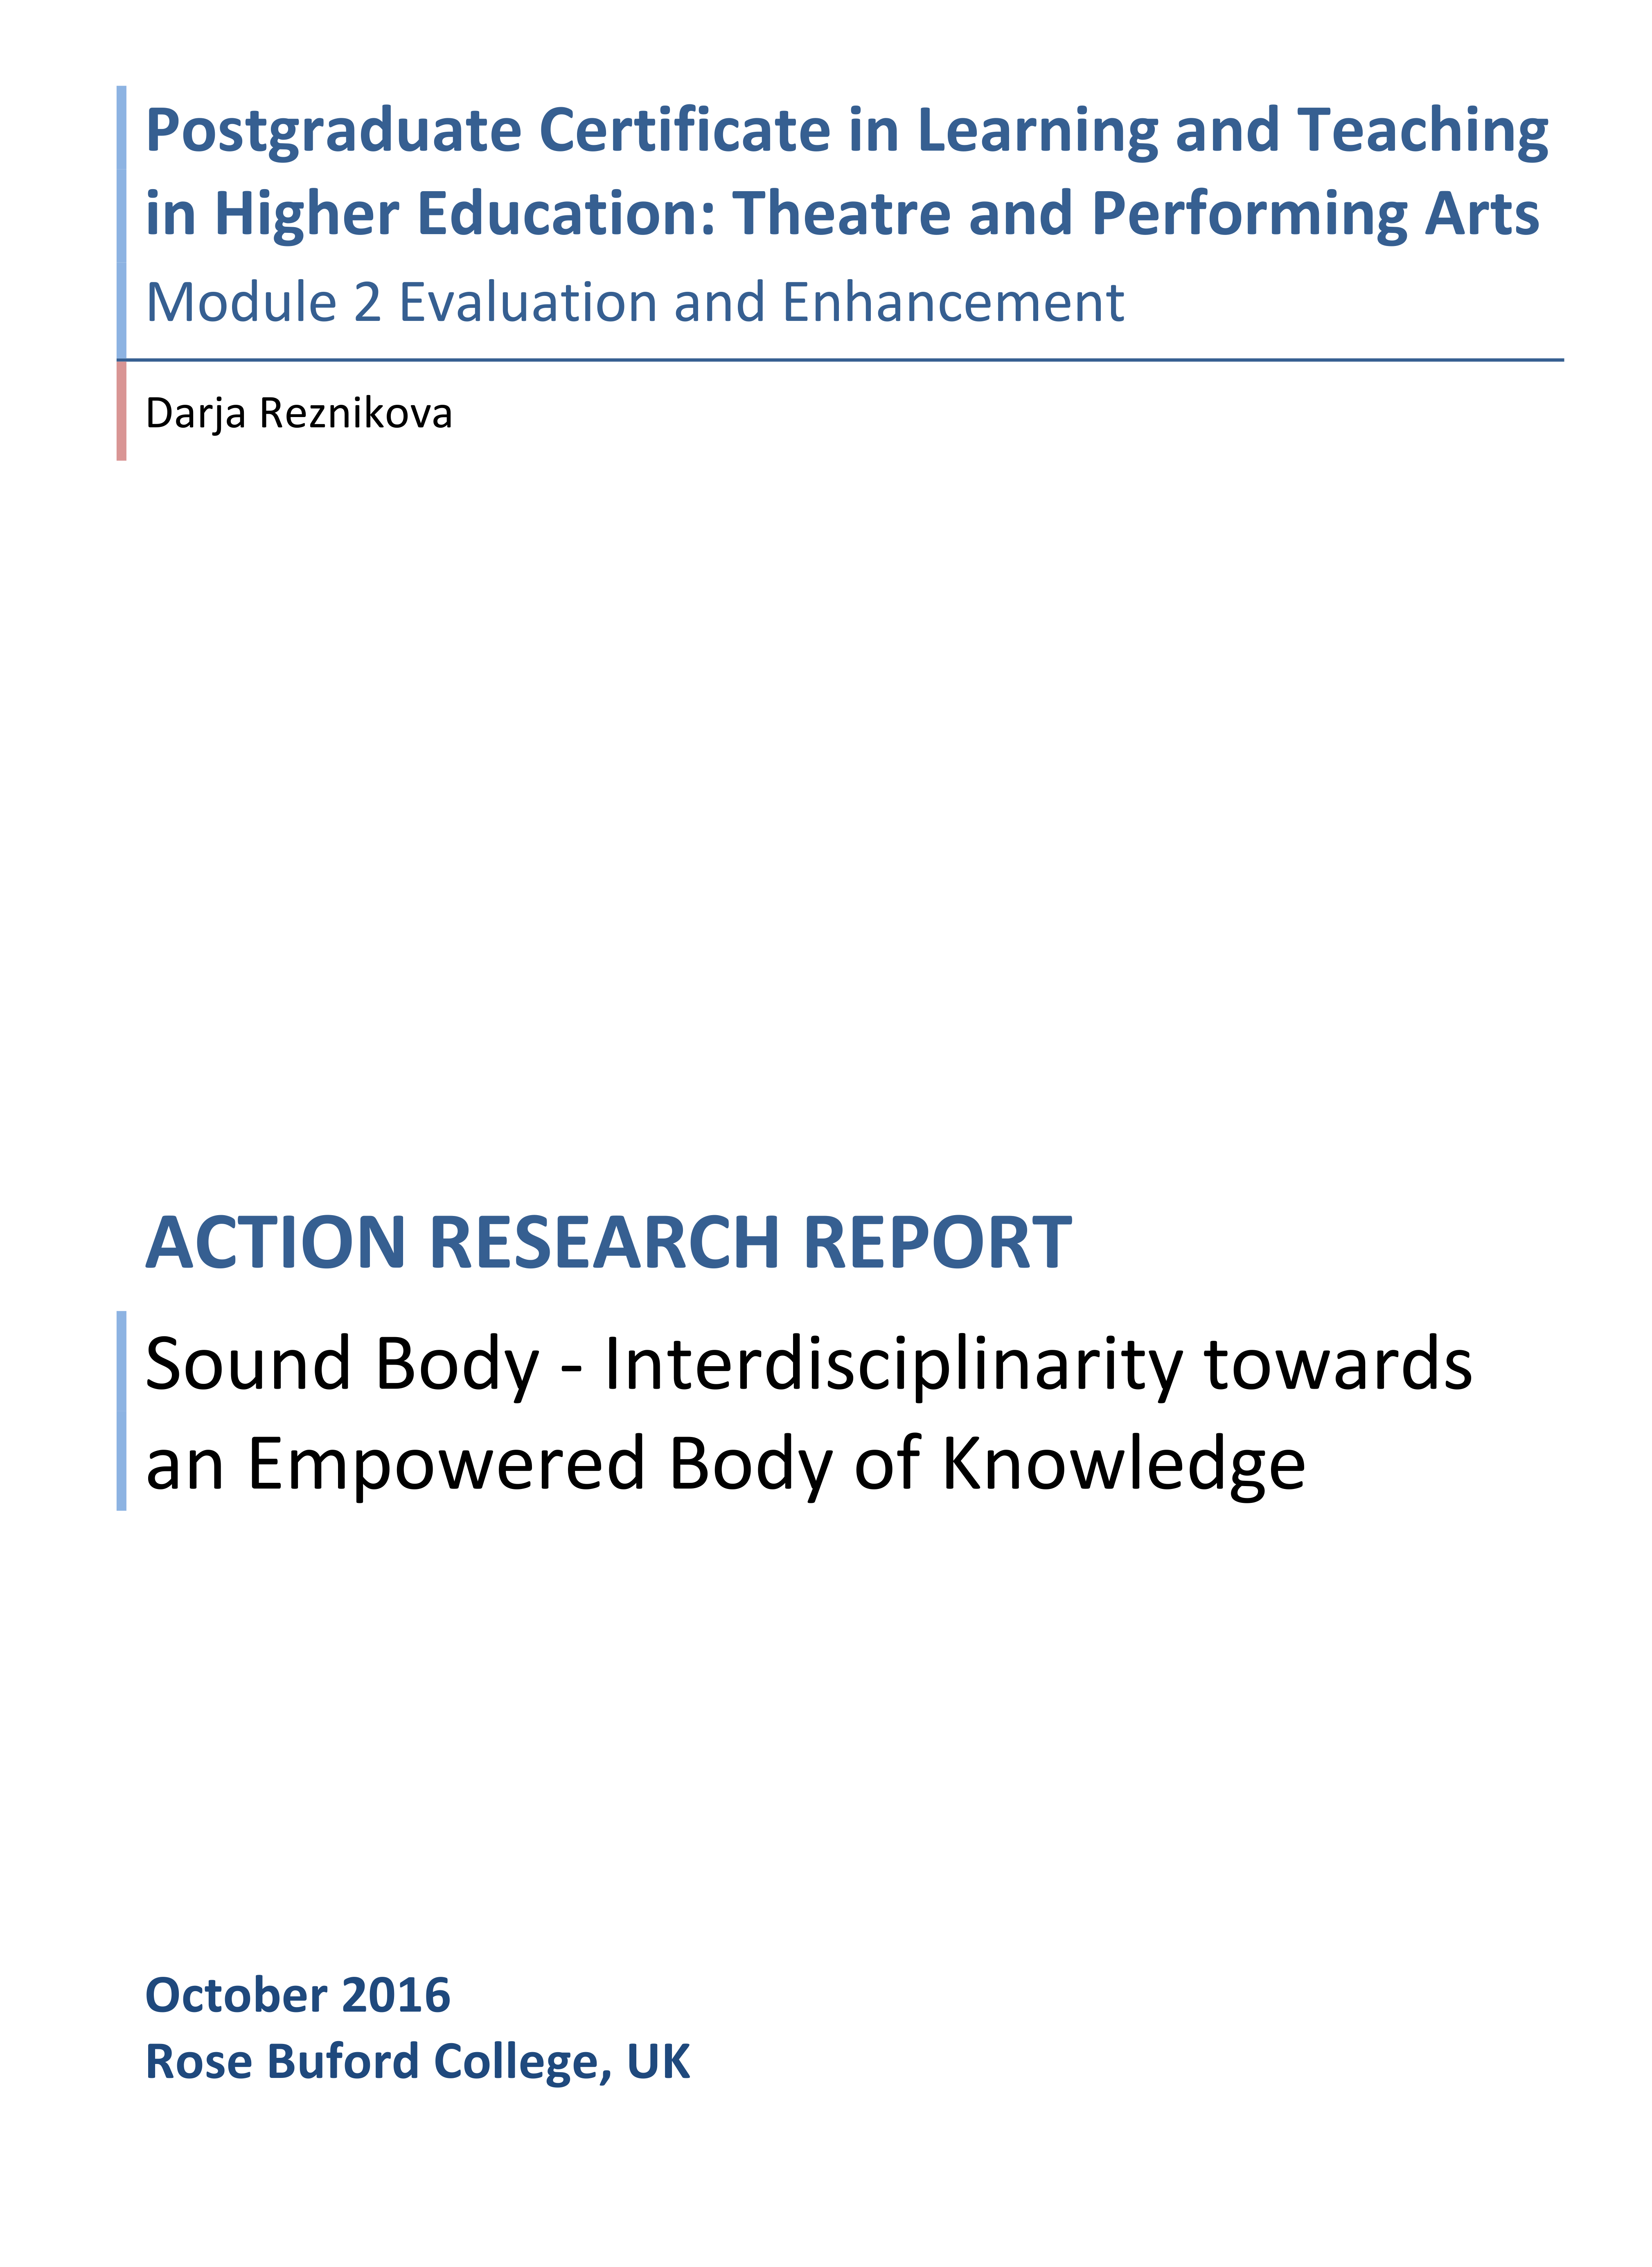 Action Research Report